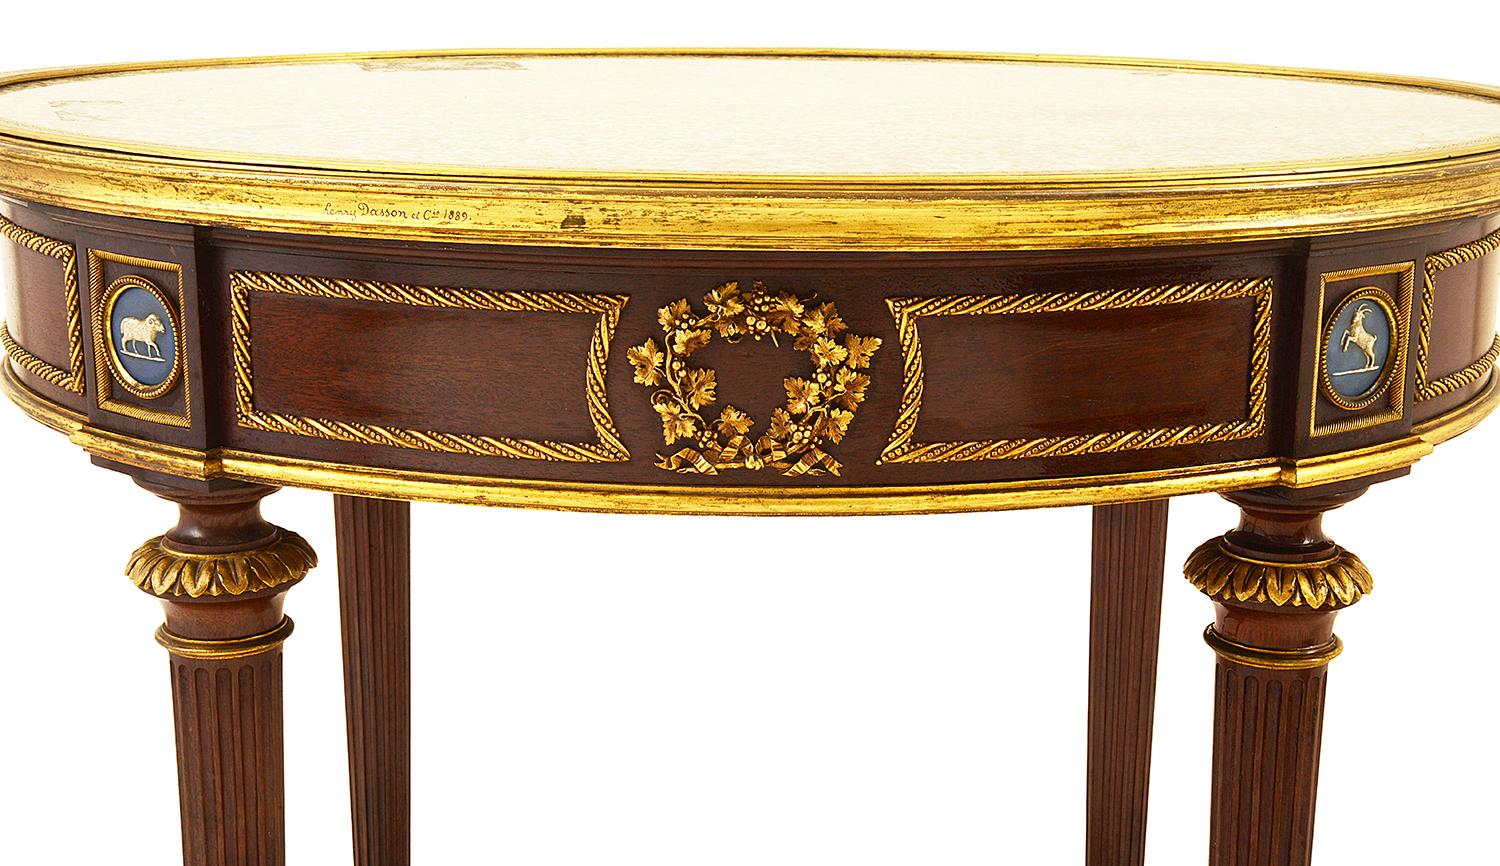 Fine quality late 19th Century marble topped Gueridon, with gilded ormolu mouldings and mounts, inset classical Wedgwood plaques, raised on turned tapering legs, united by a galleried under tier.
By Henry Dasson
Henry Dasson was a renowned